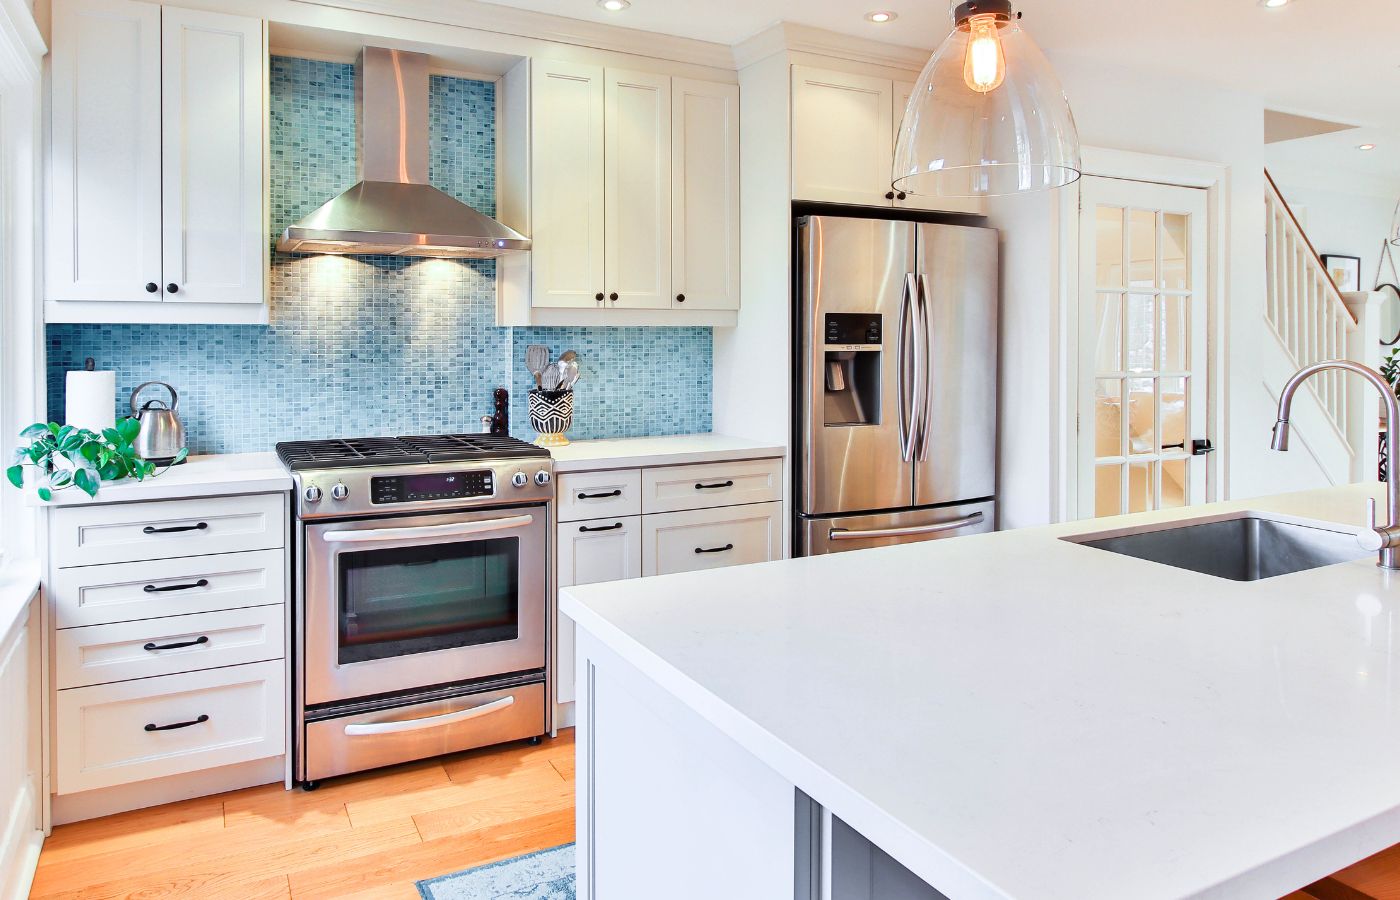 A clean kitchen with white countertops and cabinets and a blue tile backsplash.